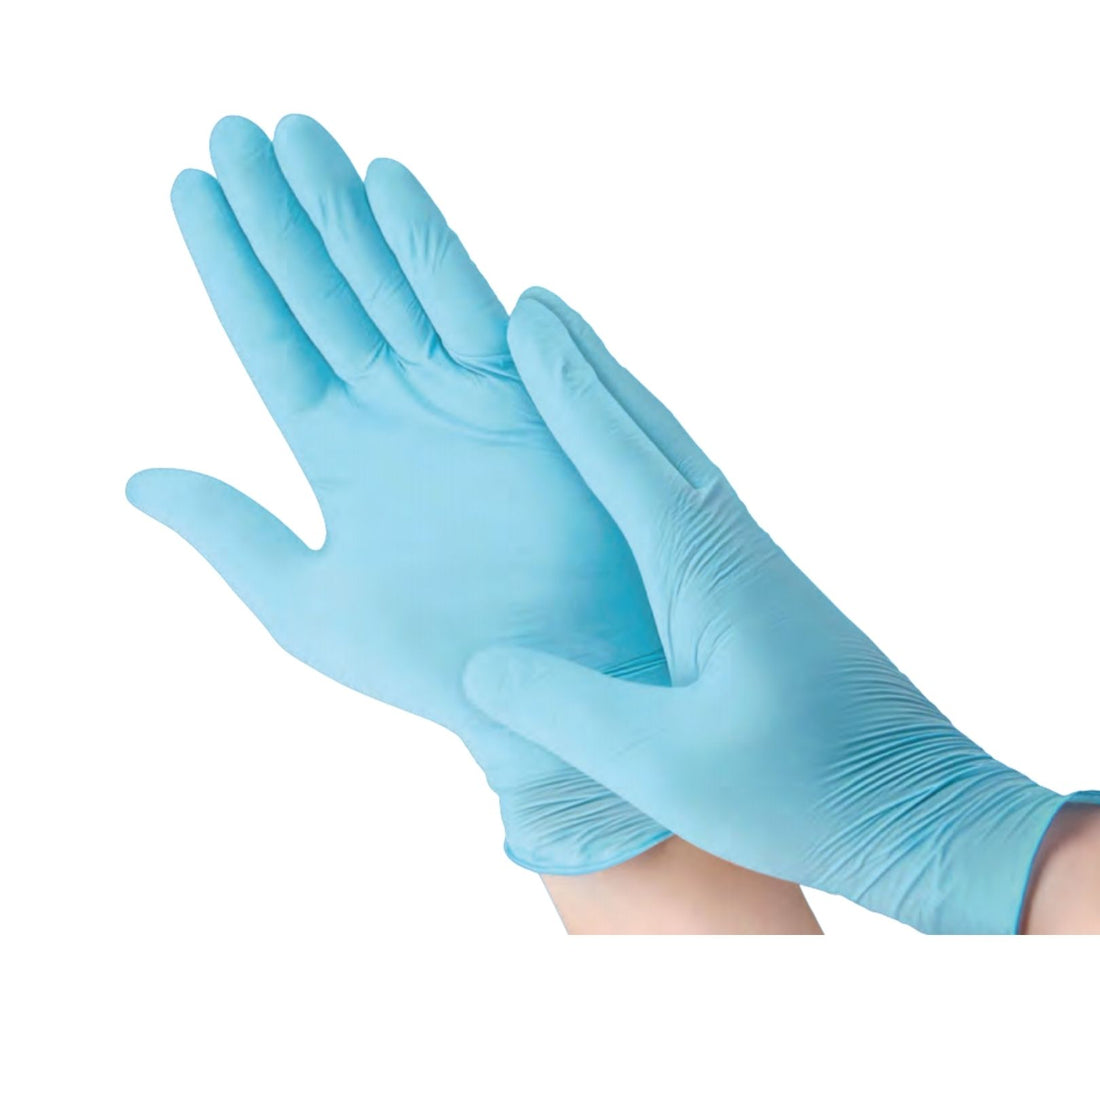 How to Properly Use Nitrile Gloves.